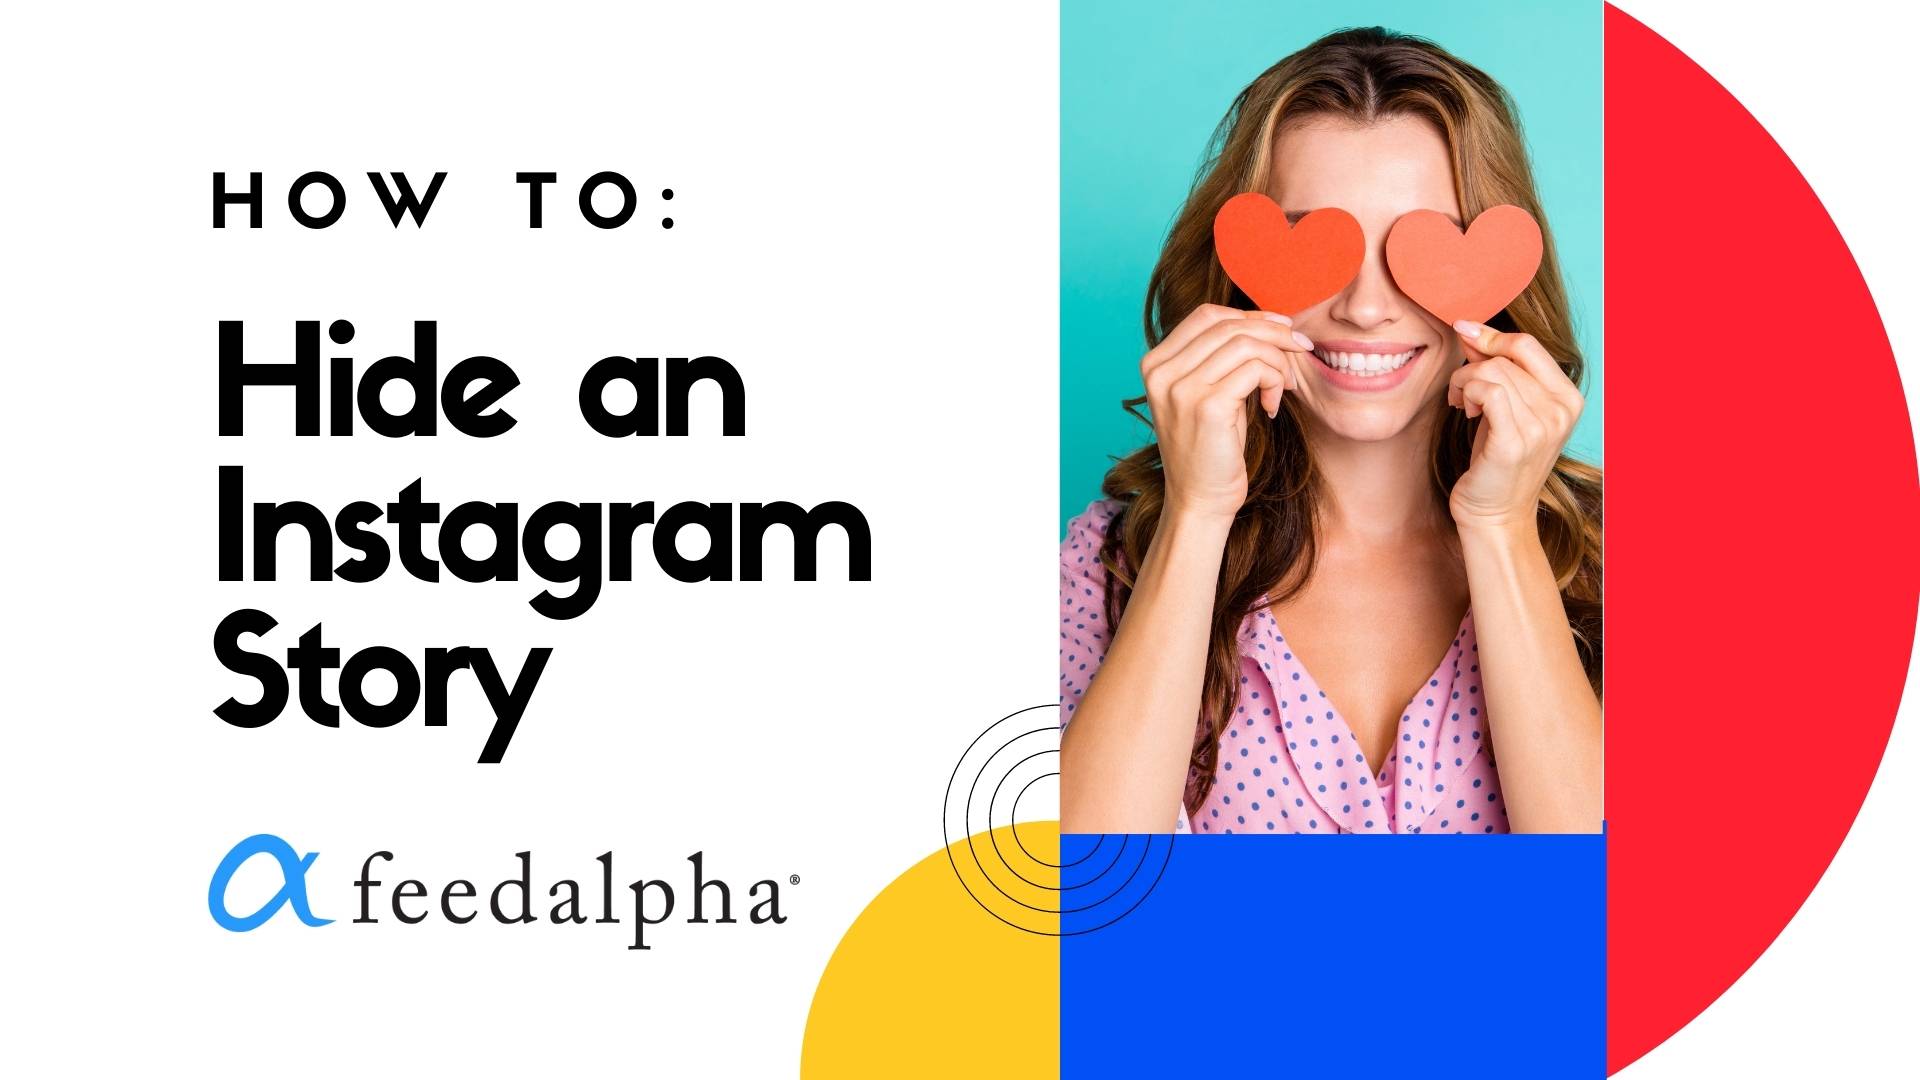 How to Hide an Instagram Story